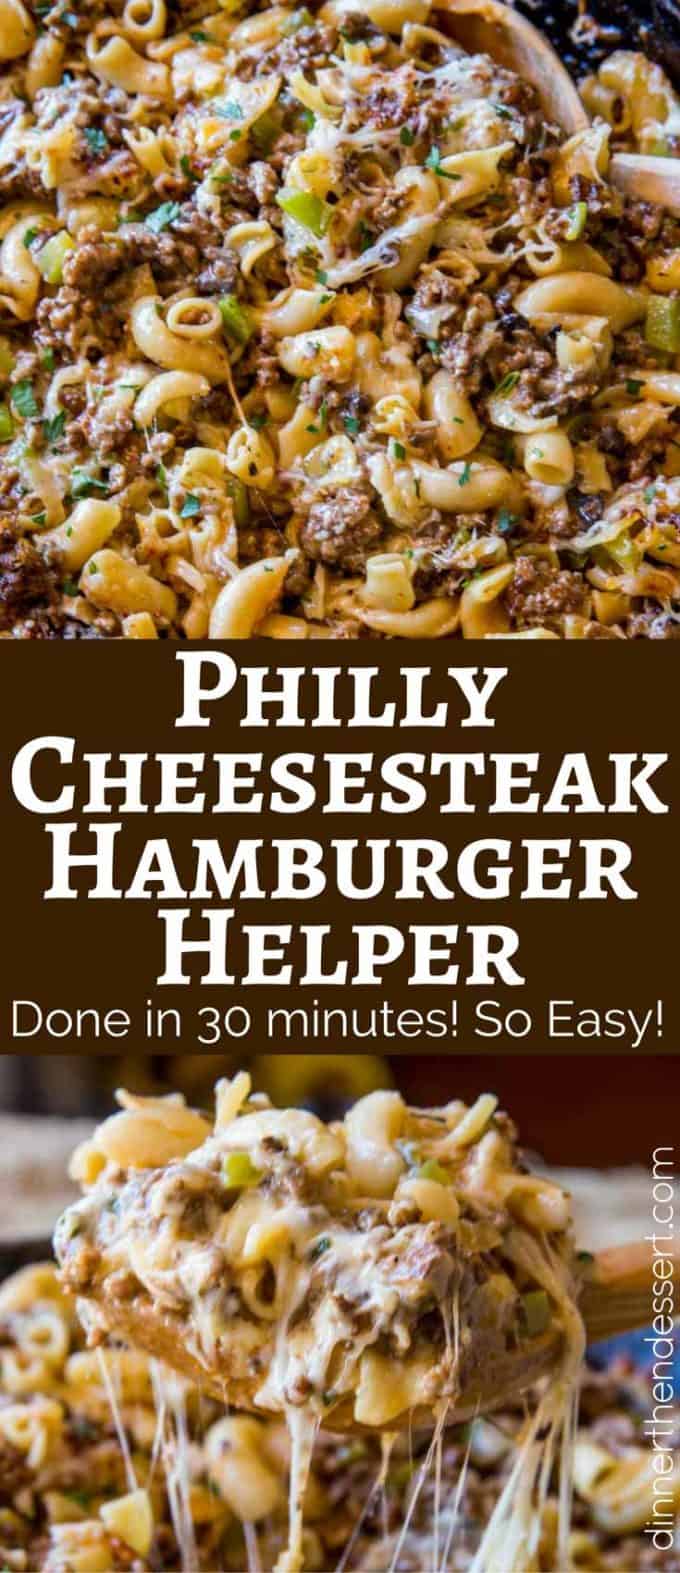 Philly Cheesesteak Hamburger Helper will make you forget all about the boxed type you had as a kid, you'll love this creamy, cheesy cheesesteak pasta.